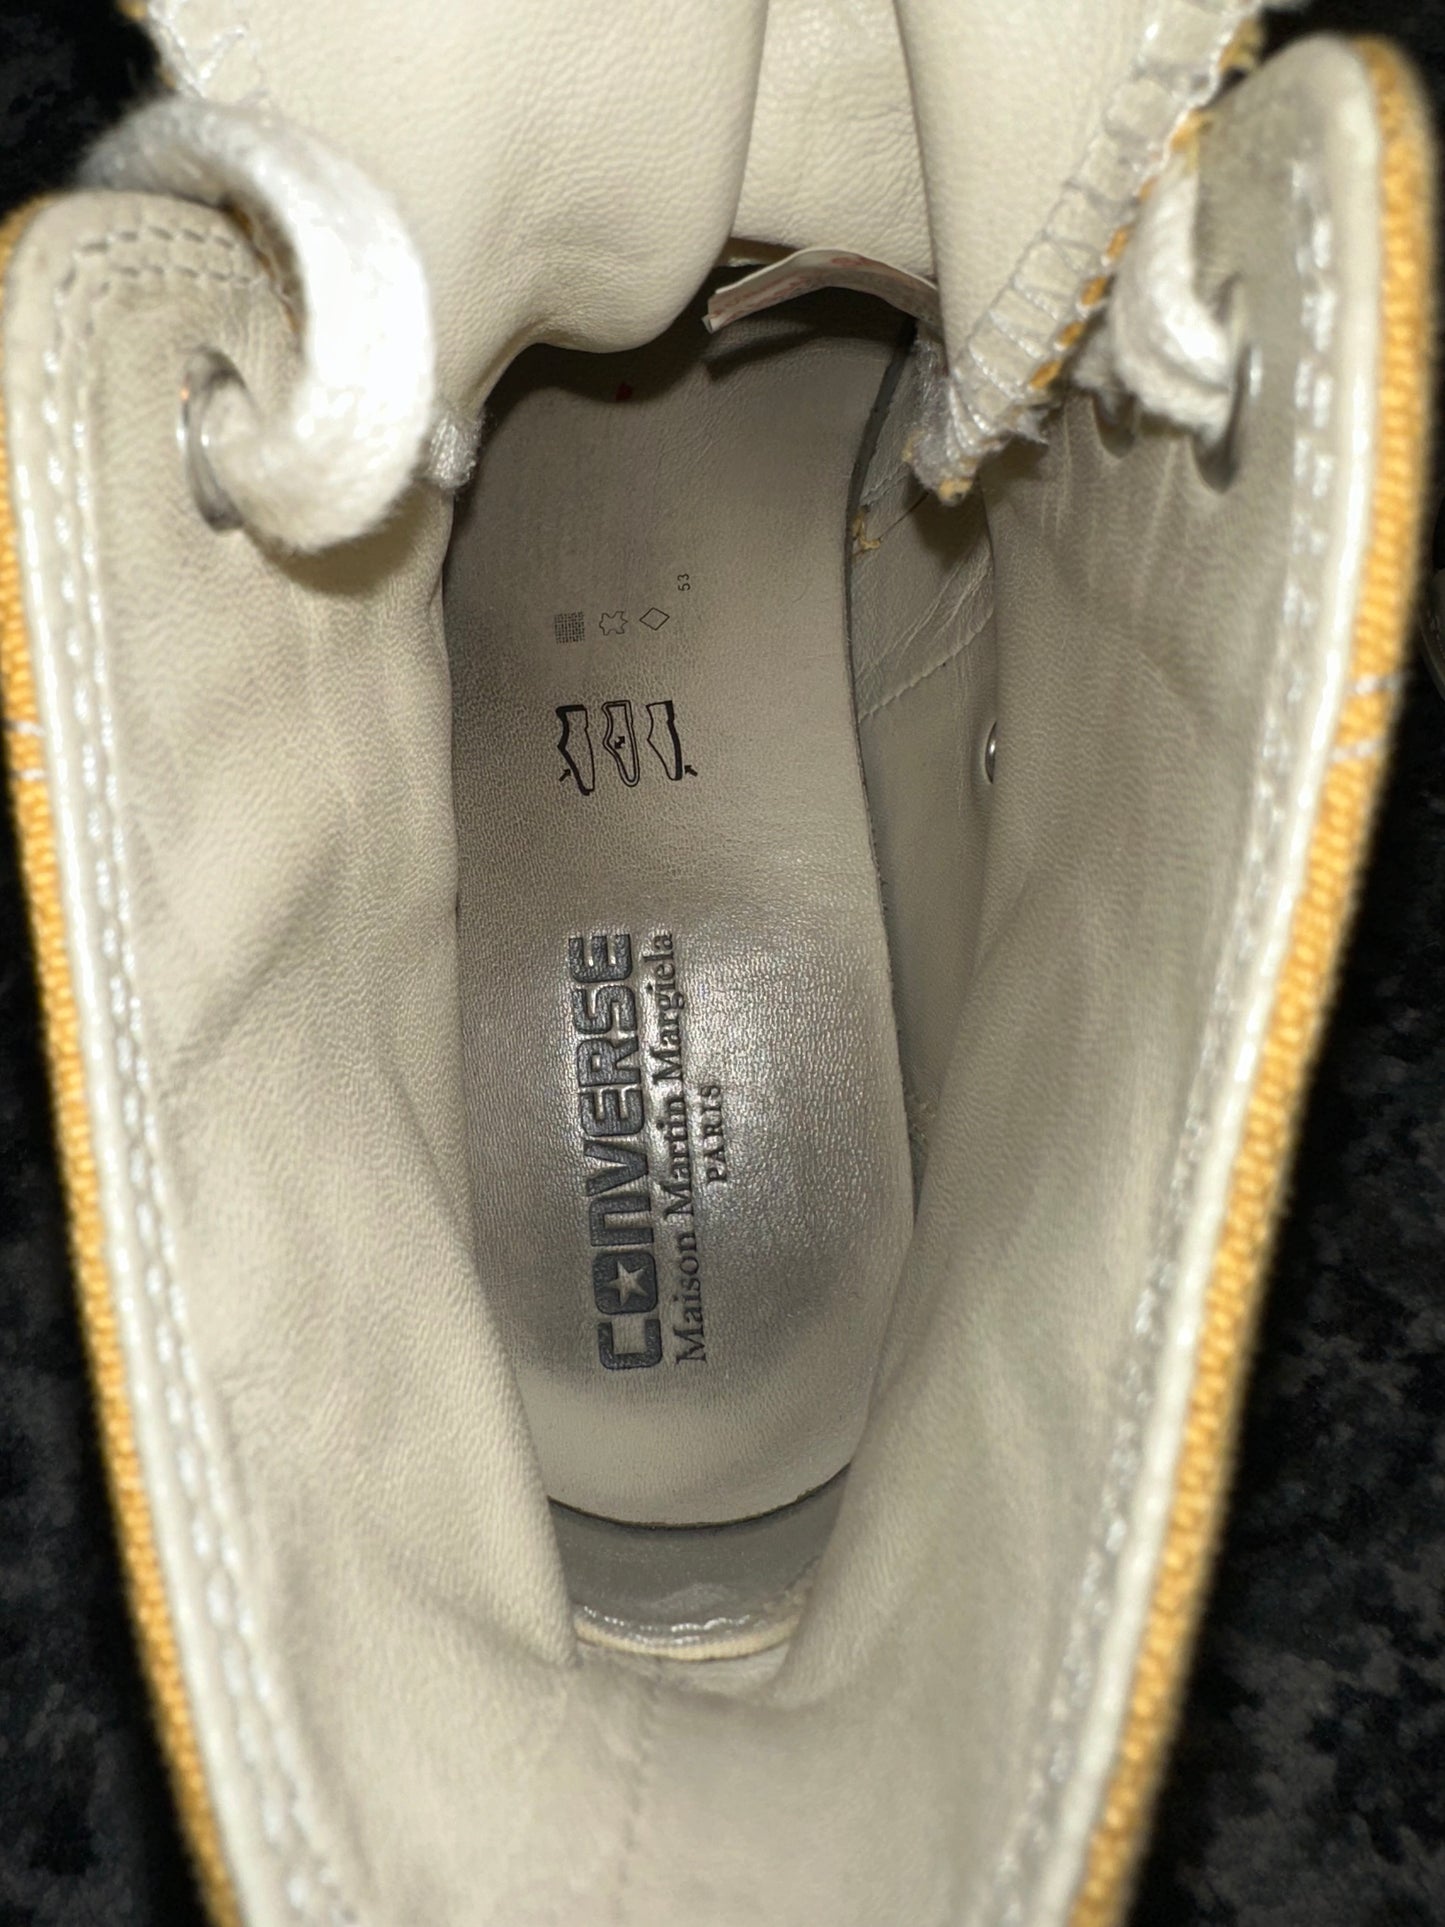 Maison Margiela 1970s Chuck Taylor All Star/Jack Purcell Yellow SAMPLE size 9